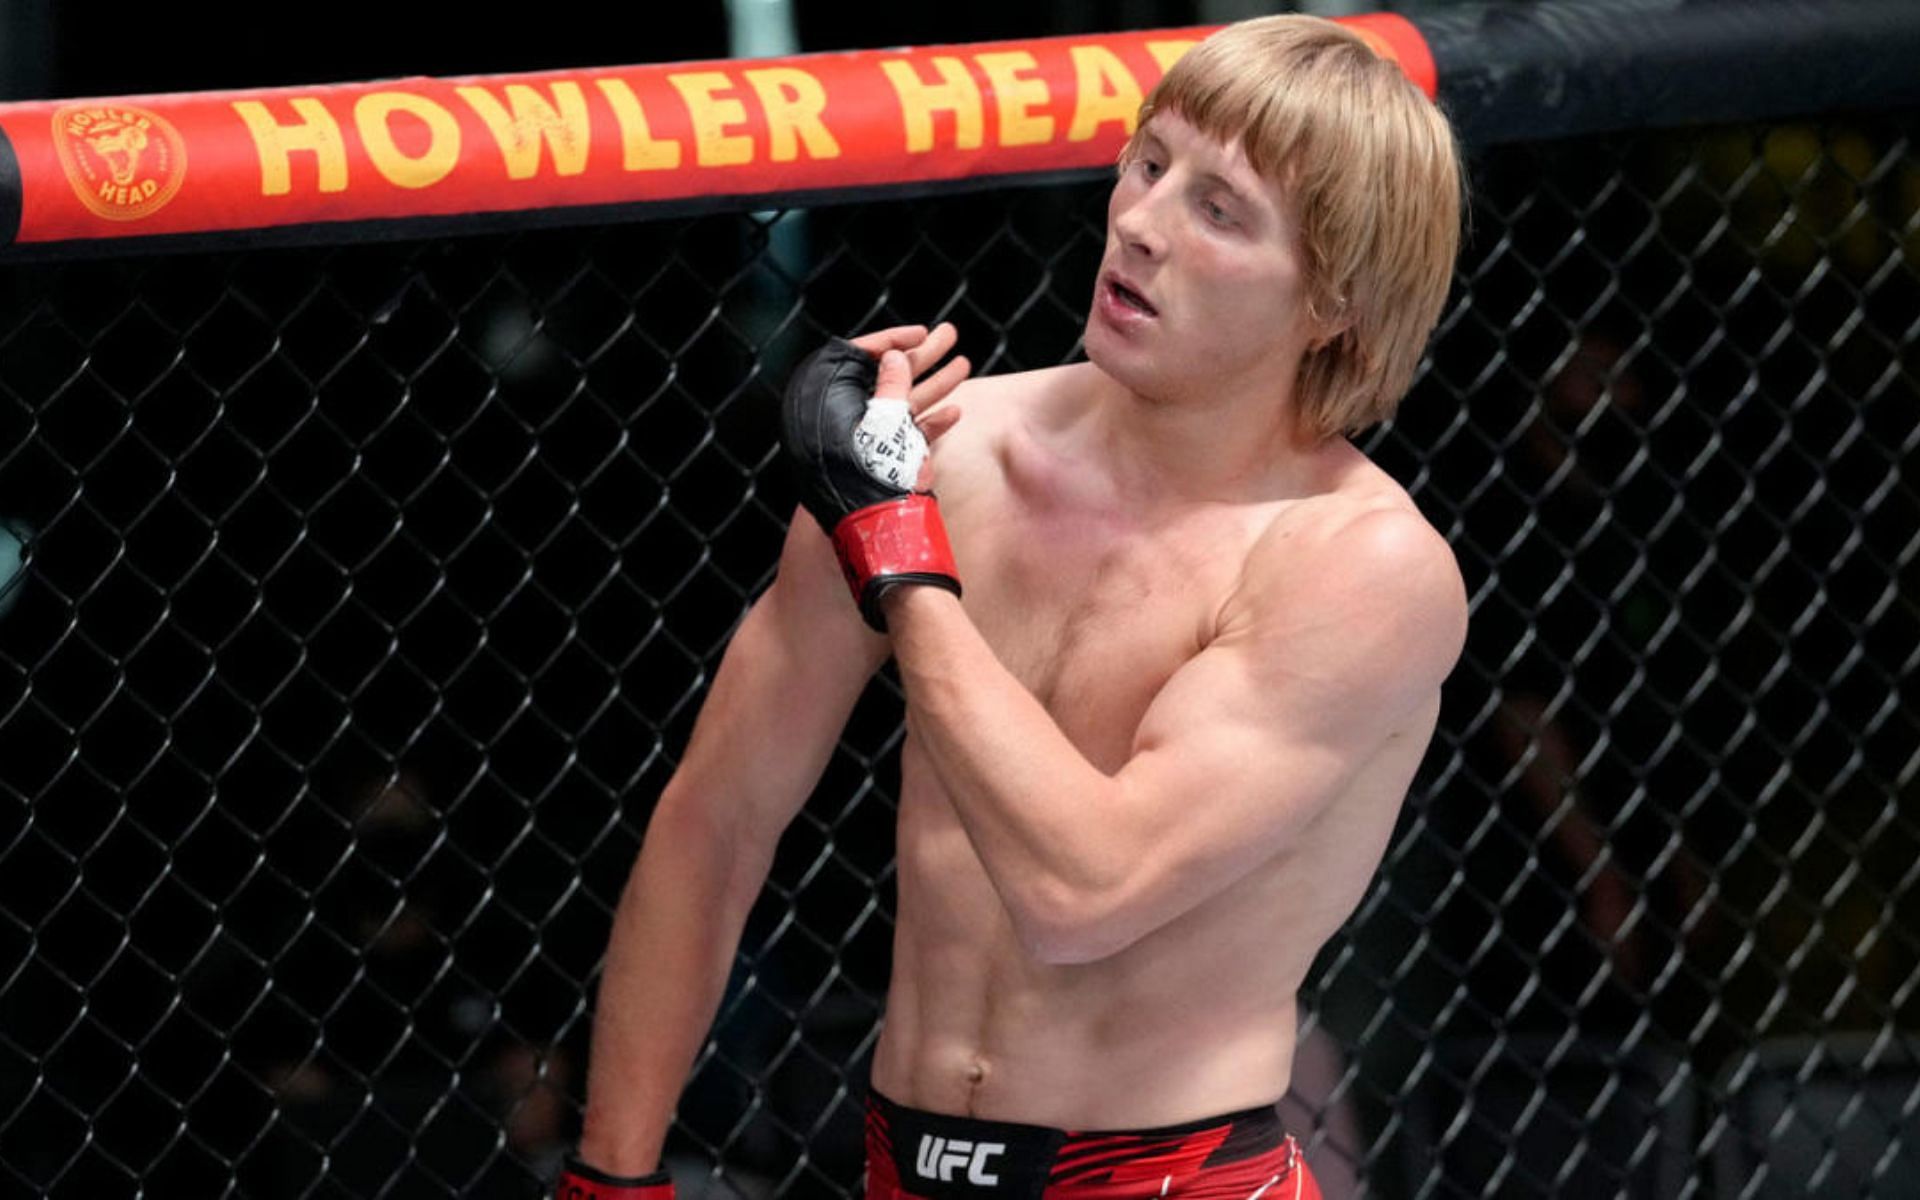 Paddy Pimblett&#039;s second octagon appearance should make this weekend&#039;s show well worth watching